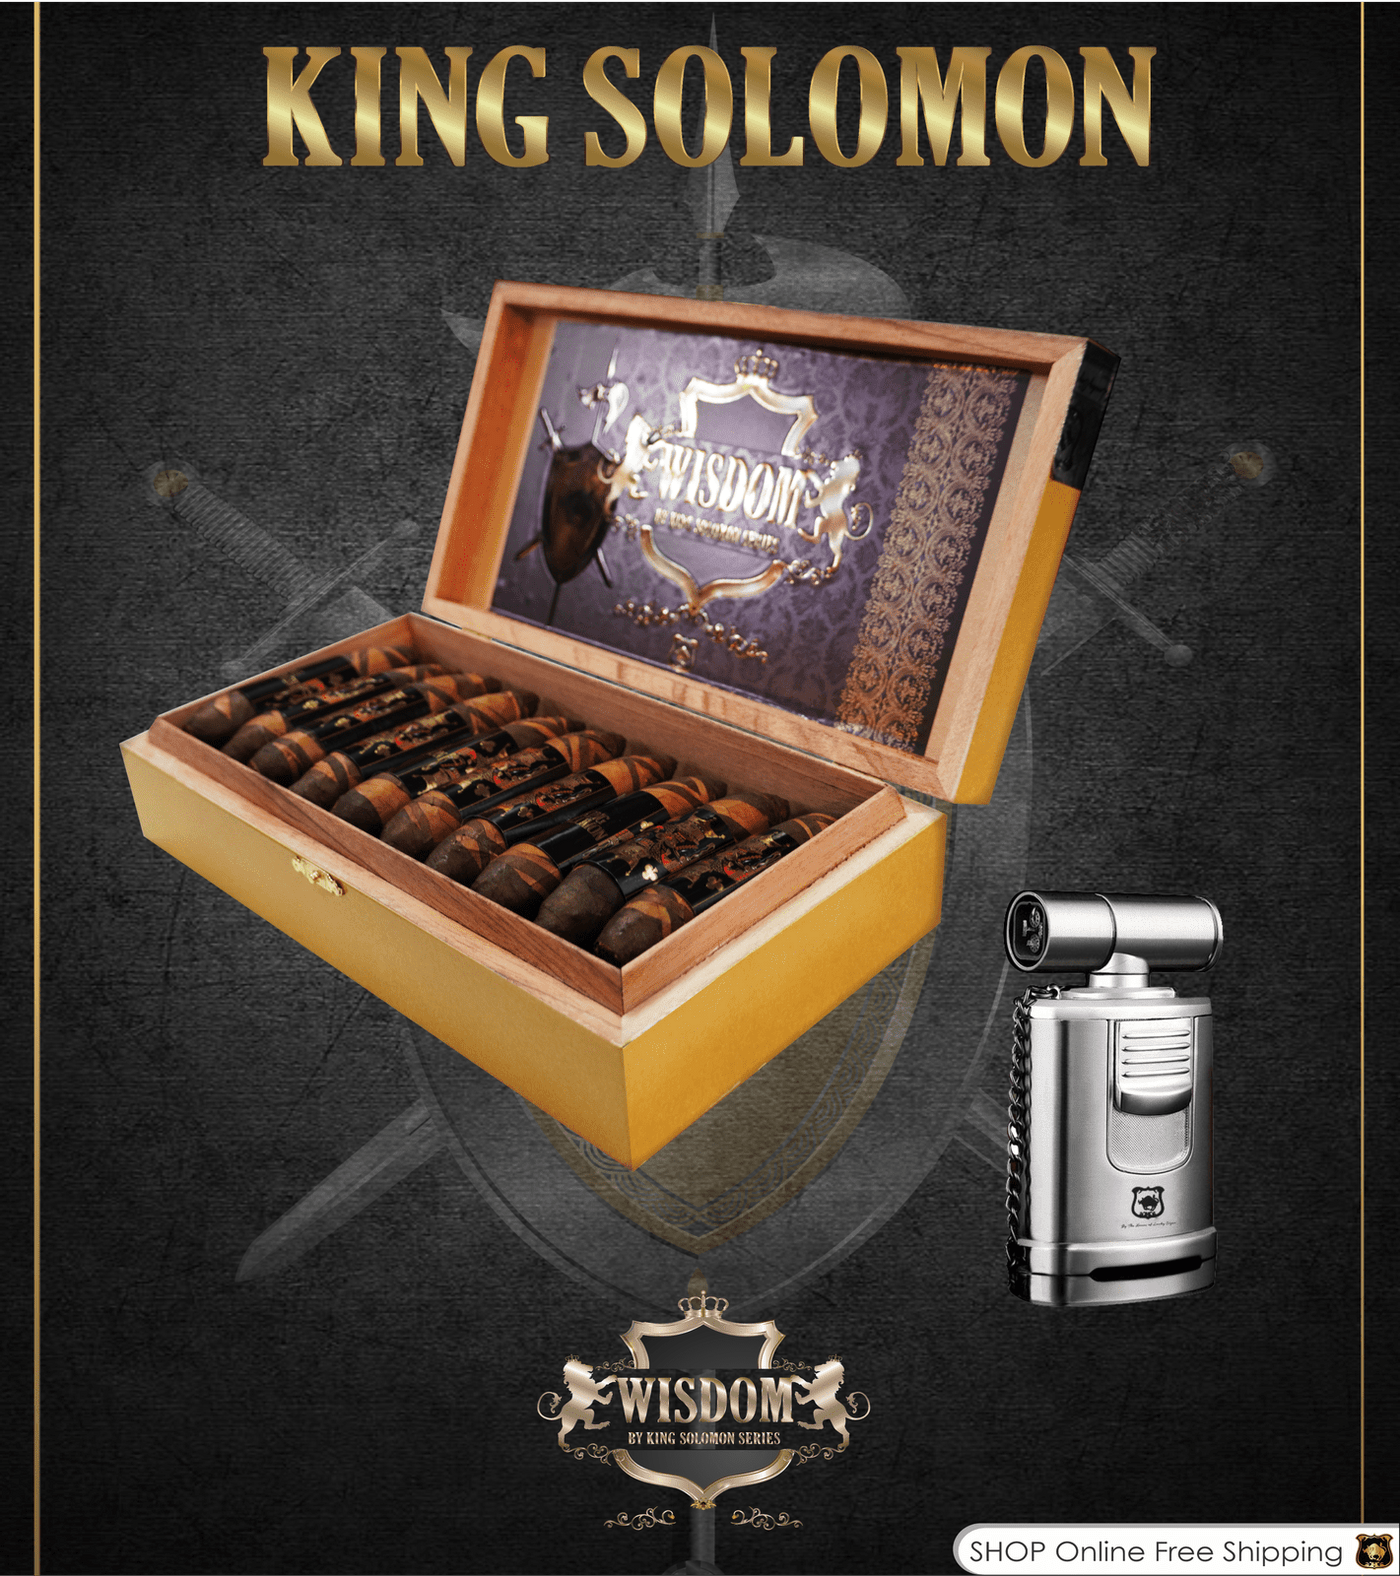 Wisdom 4x60 Cigar From The King Solomon Series: Box of 20 with Torch